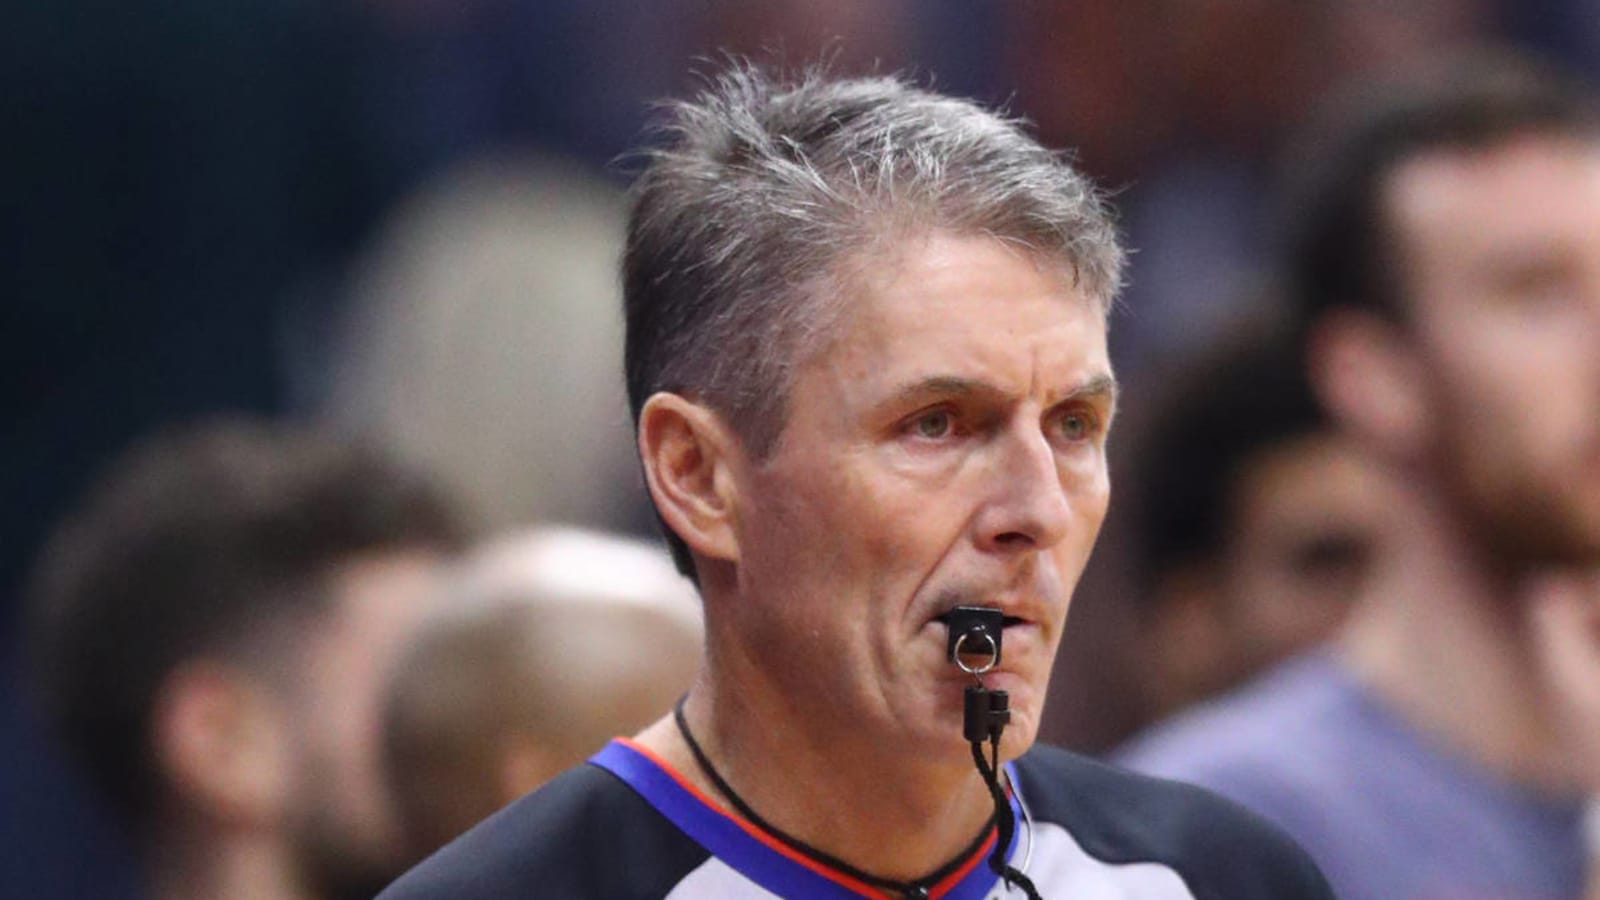 Scott Foster officiating Game 6 is bad news for Chris Paul, Suns